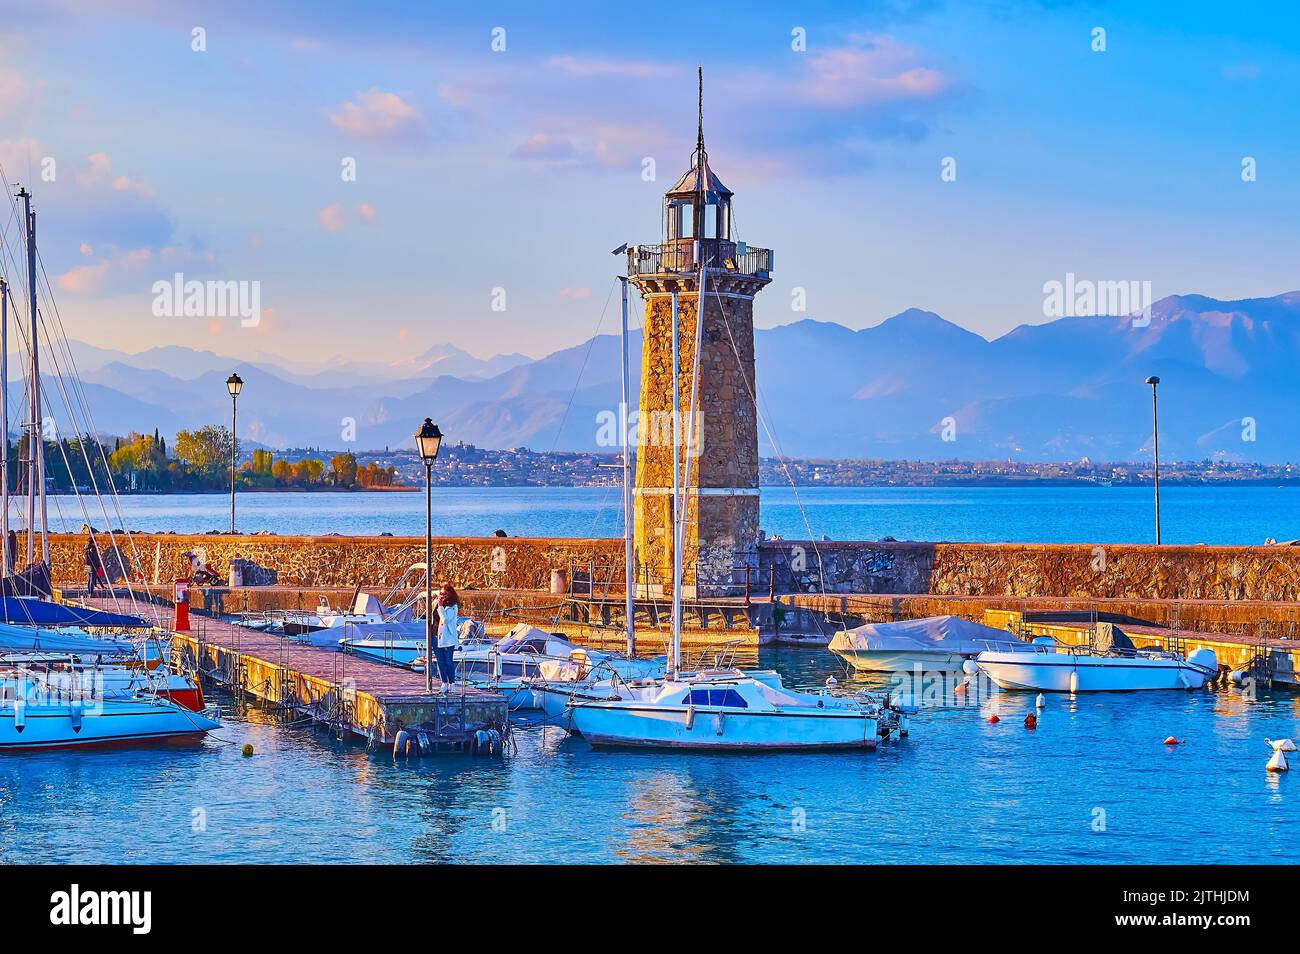 Historic stone lighthouse on Diga Foranea breakwater with yachts and boats in port and the Garda Prealps in the background at foggy sunset, Desenzano Stock Photo